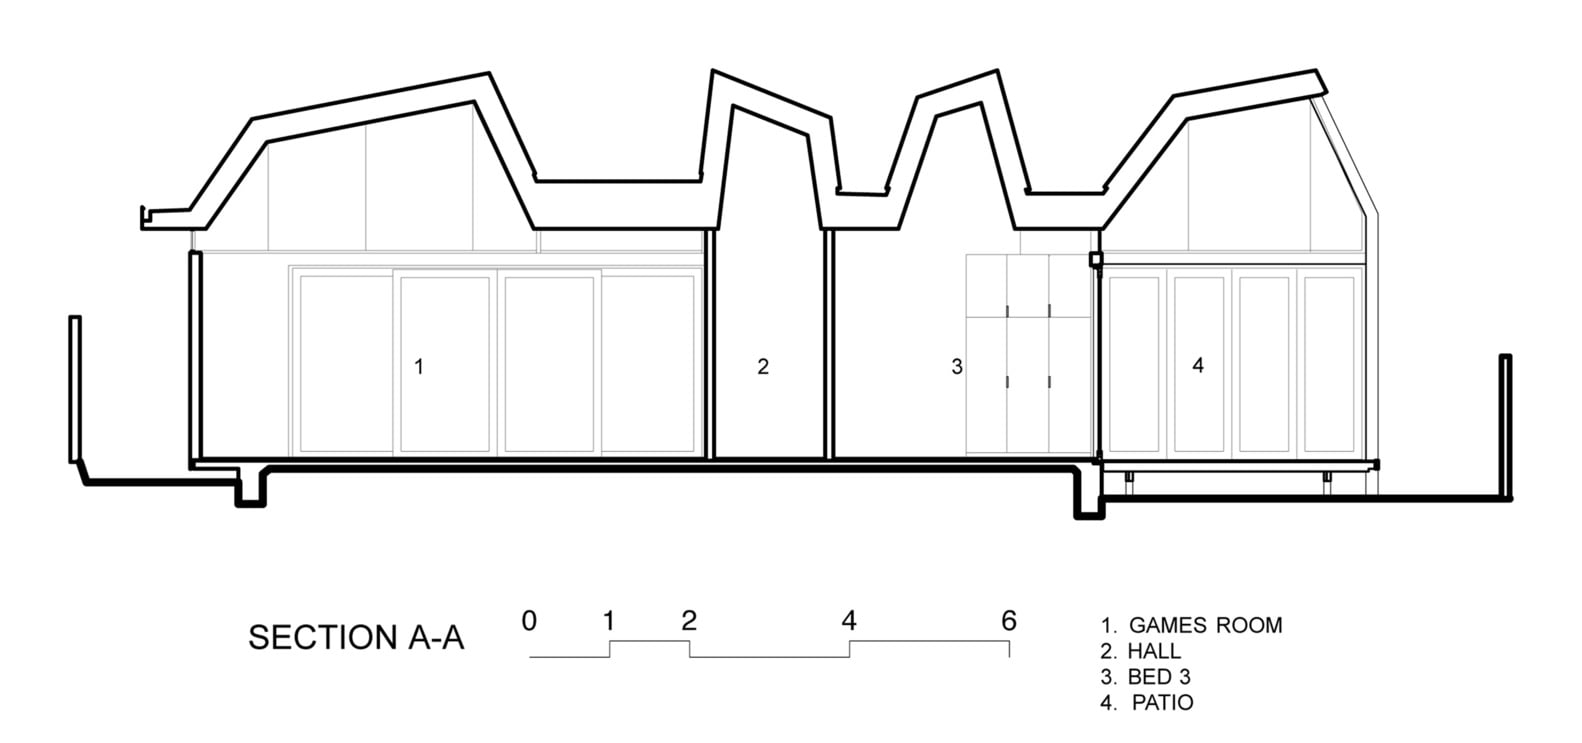 colvin elevation floorplan and section 2